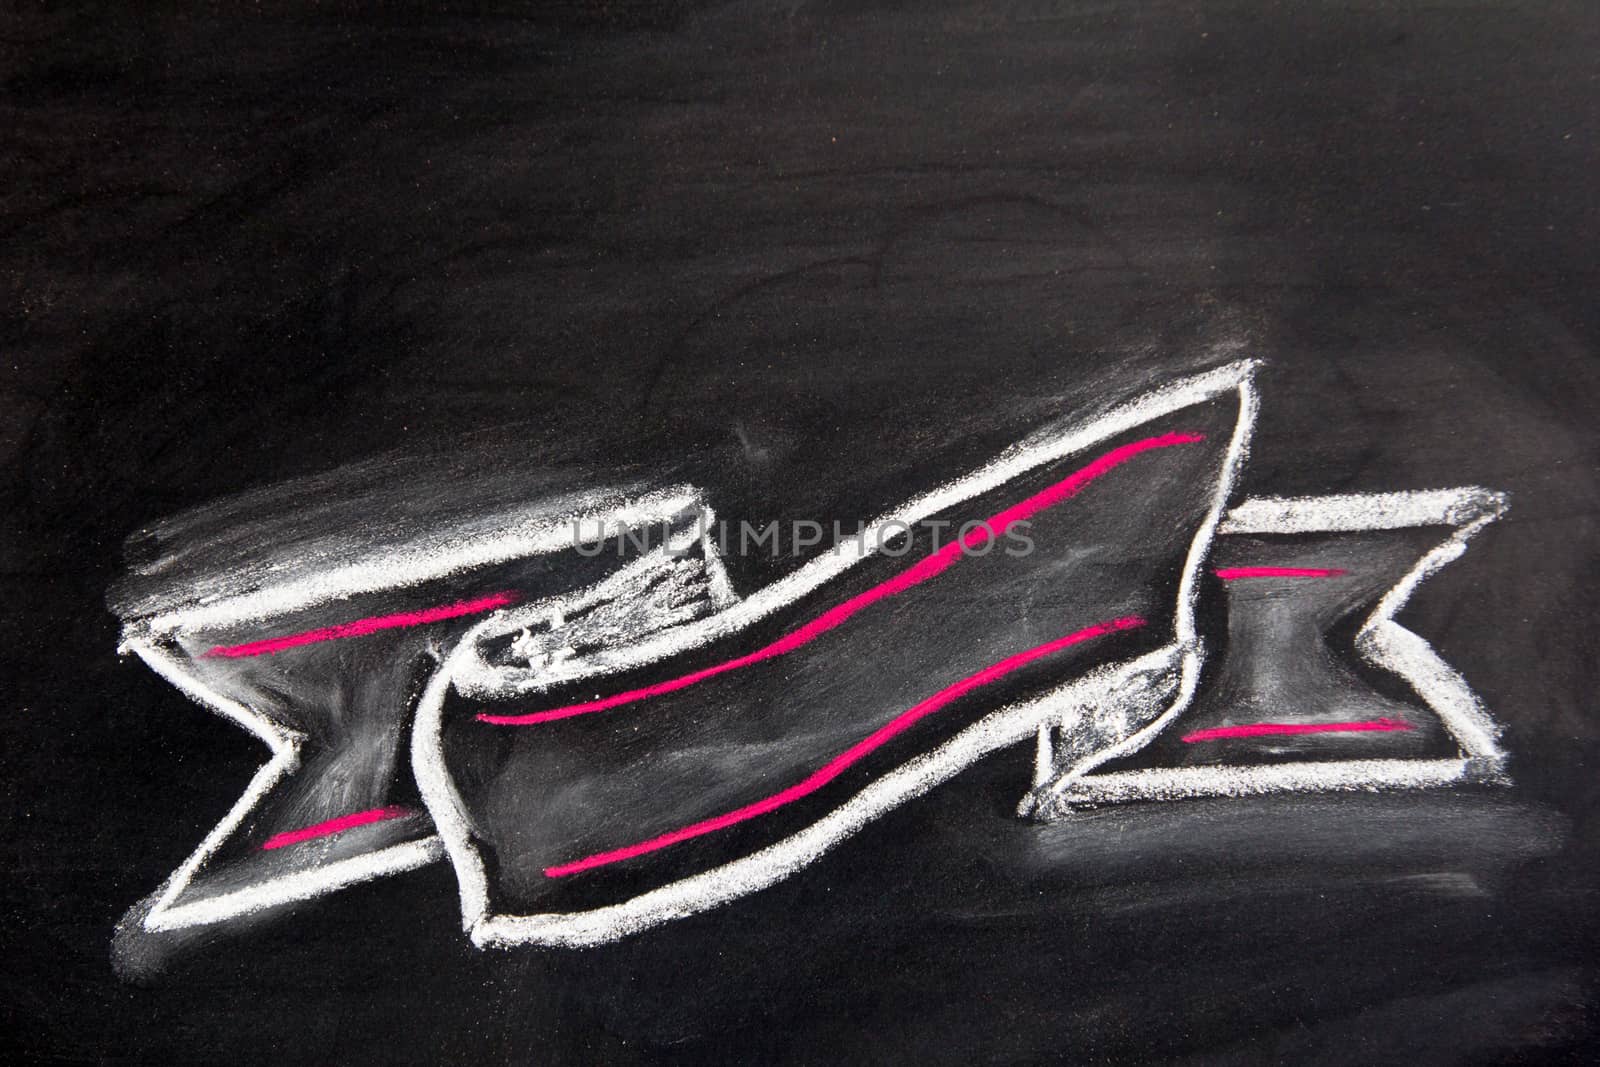 Grunge blank ribbon draw by red and white chalk on black board background